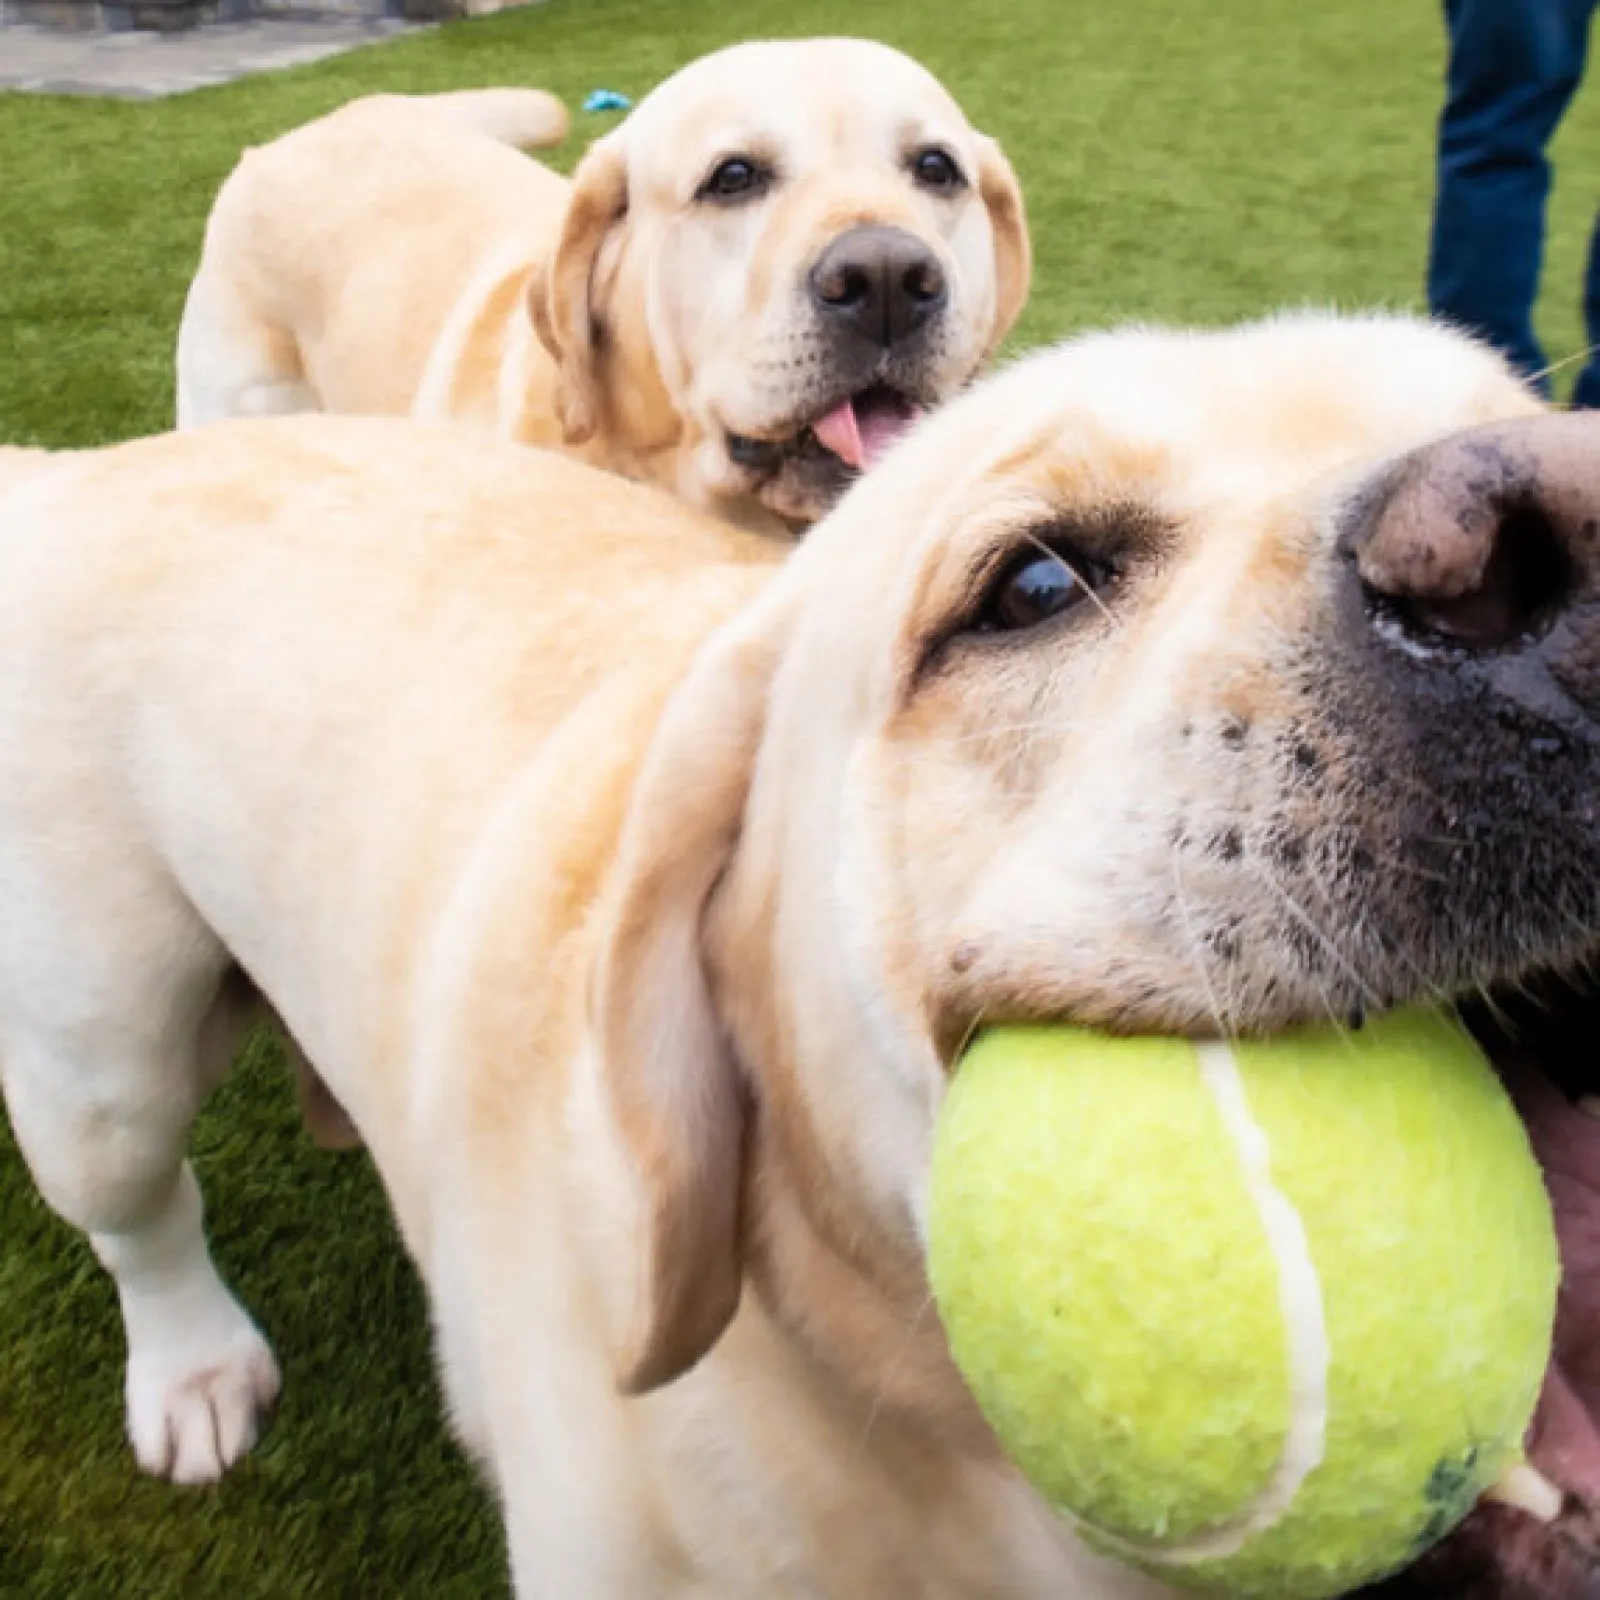 a group of dogs lying on the grass with a ball in their mouth